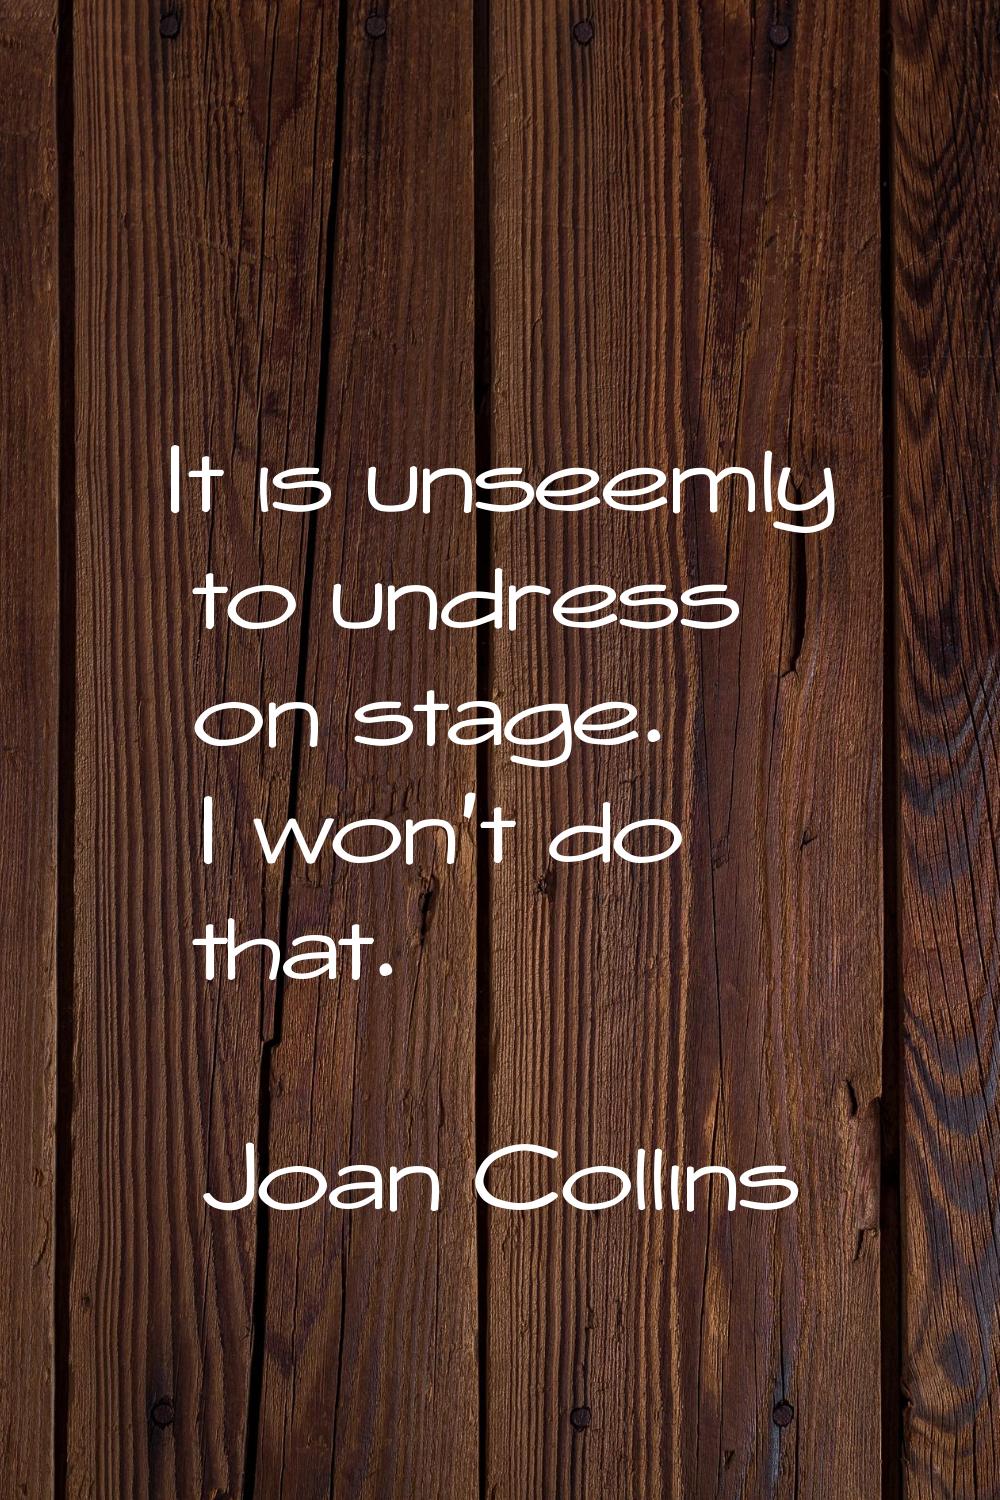 It is unseemly to undress on stage. I won't do that.